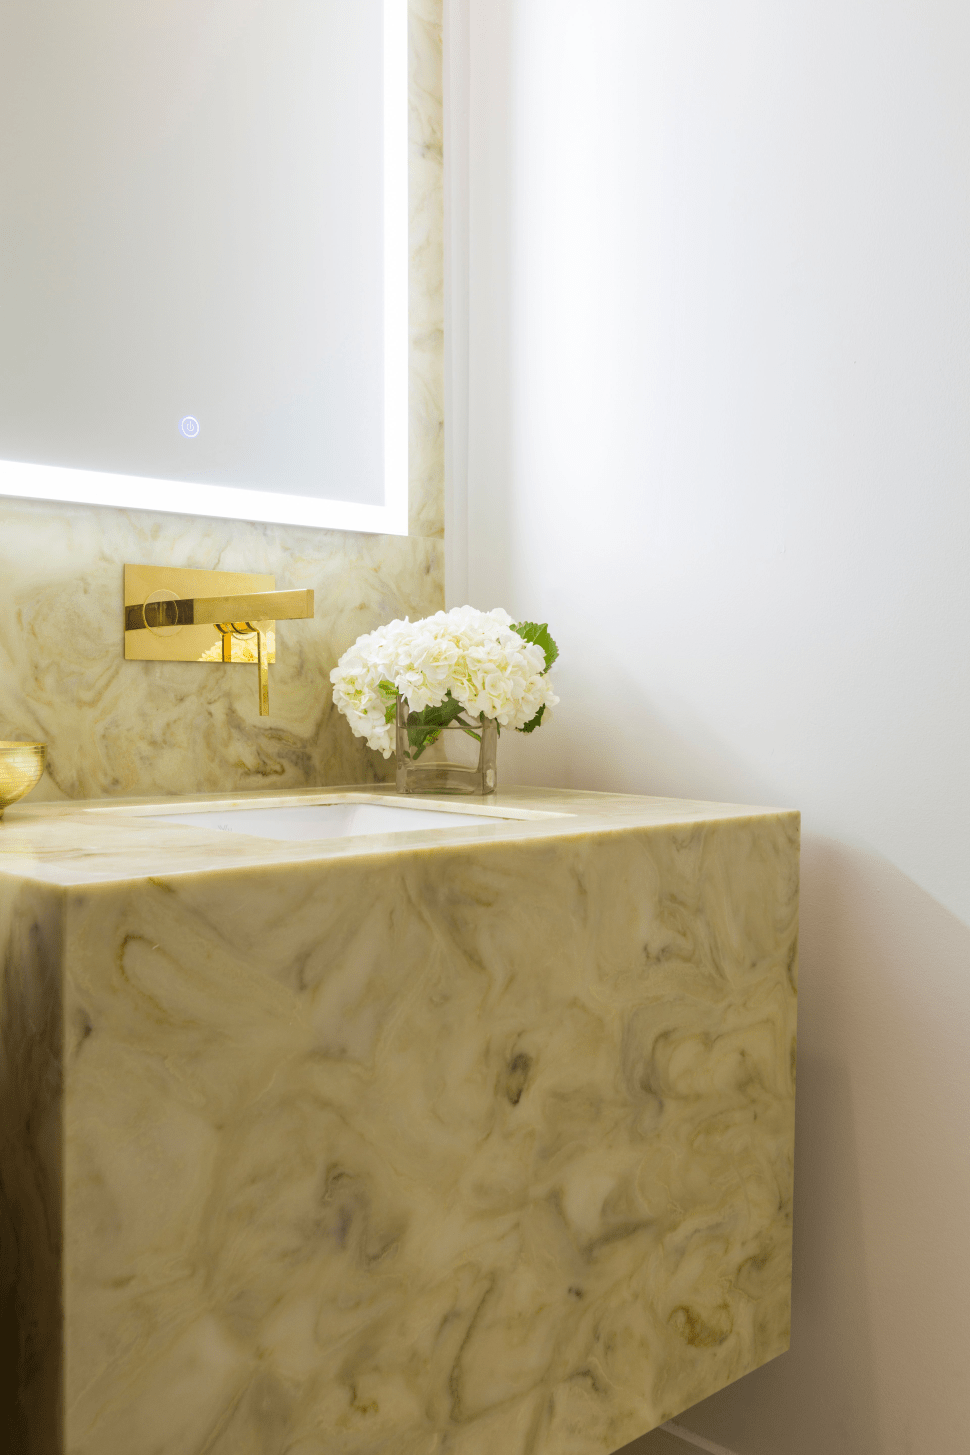 Countertop in neutral color with contrasting faucets in this beautiful powder room by LauraU